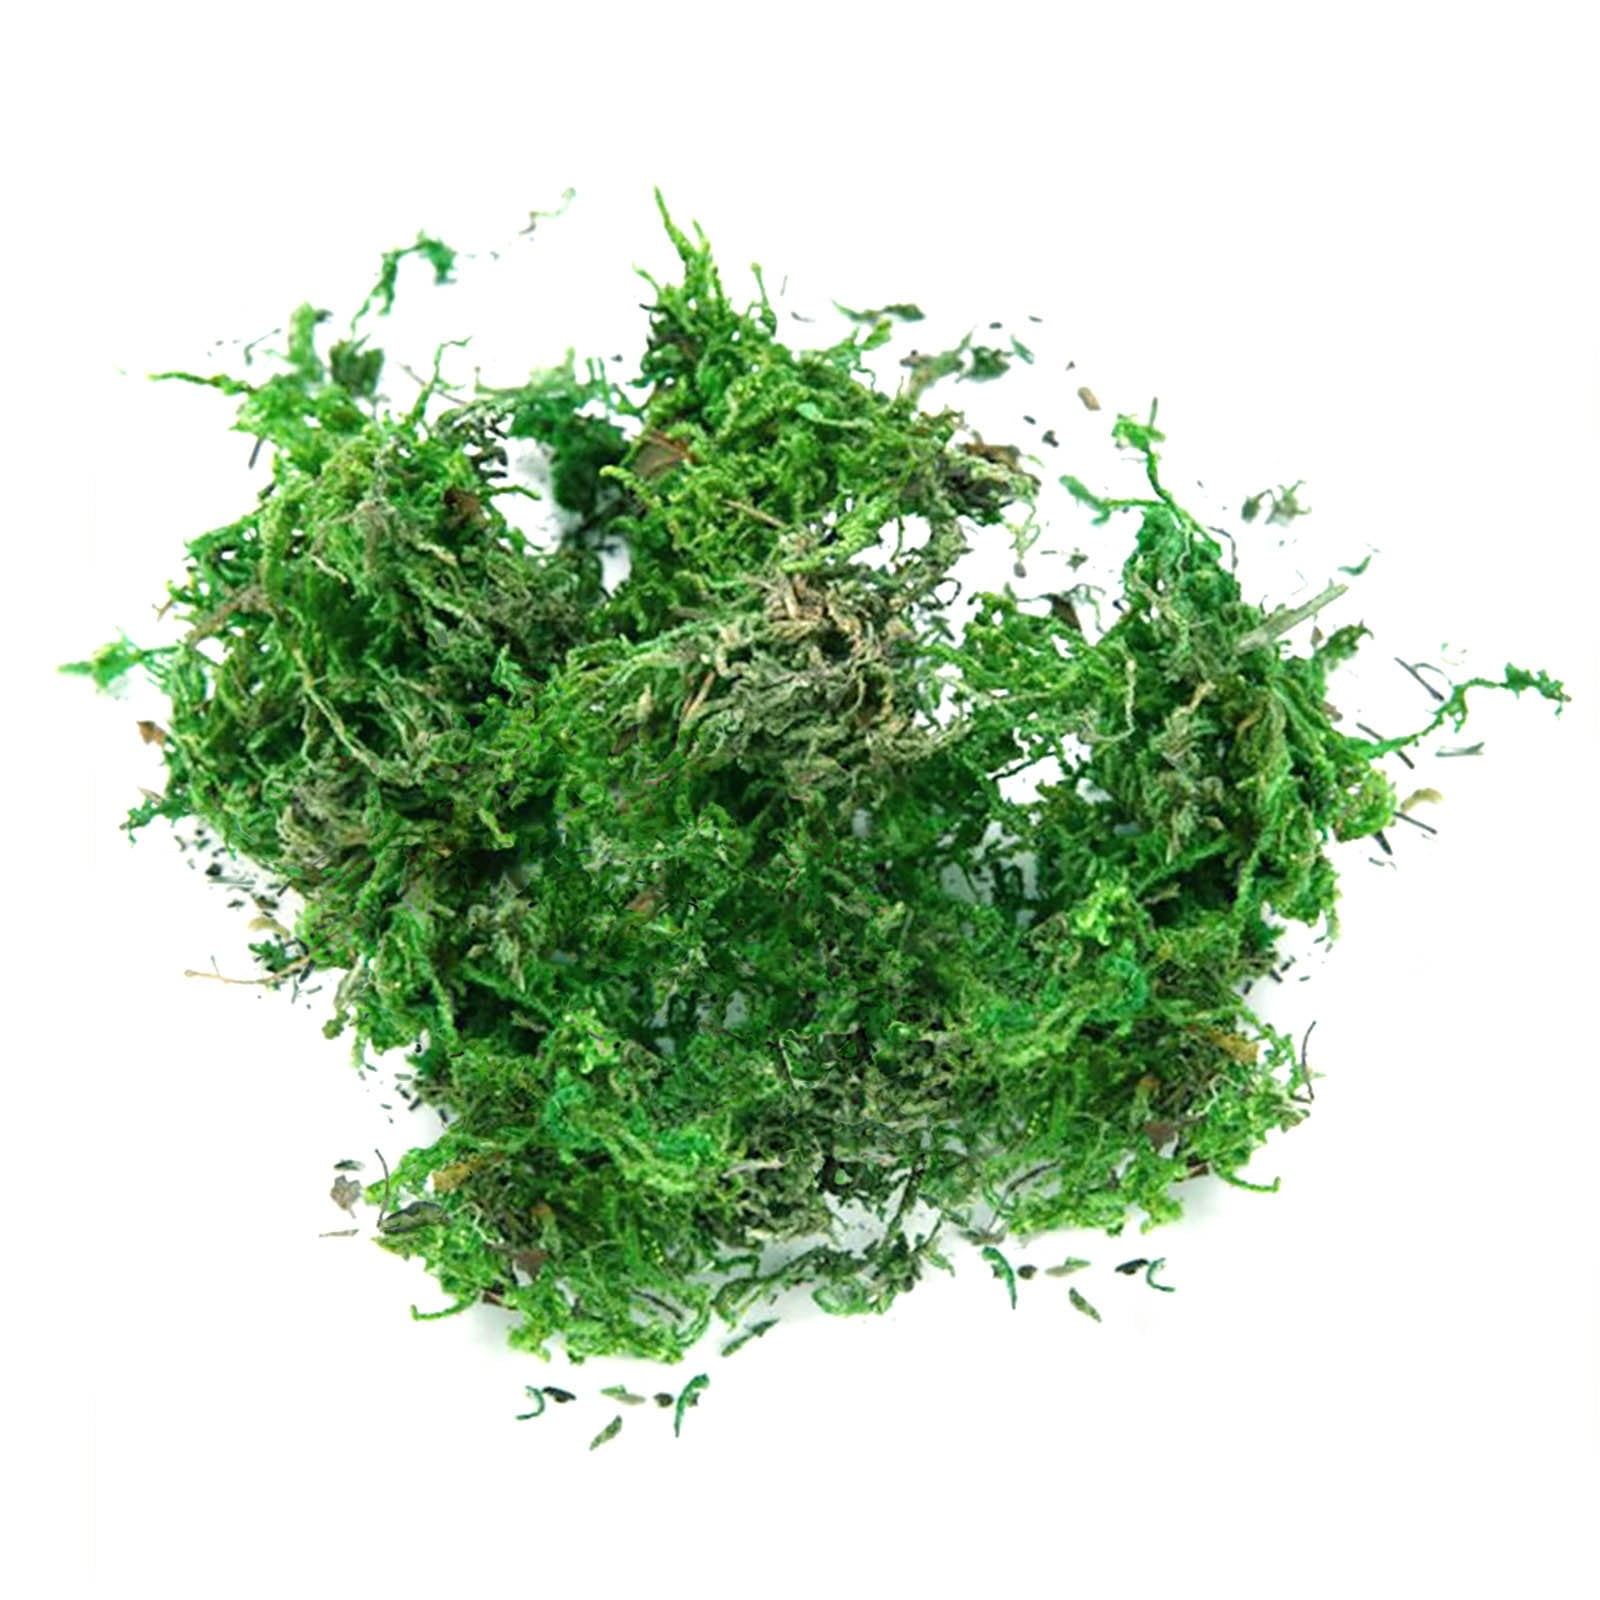 READY STOCK] 50G & 100G ARTIFICIAL MOSS FOR PLANTERS FLOWER GARDEN LAWN  CRAFTS WEDDING DECORATION / FAKE MOSS FOR POTTED PLANTS FOREST